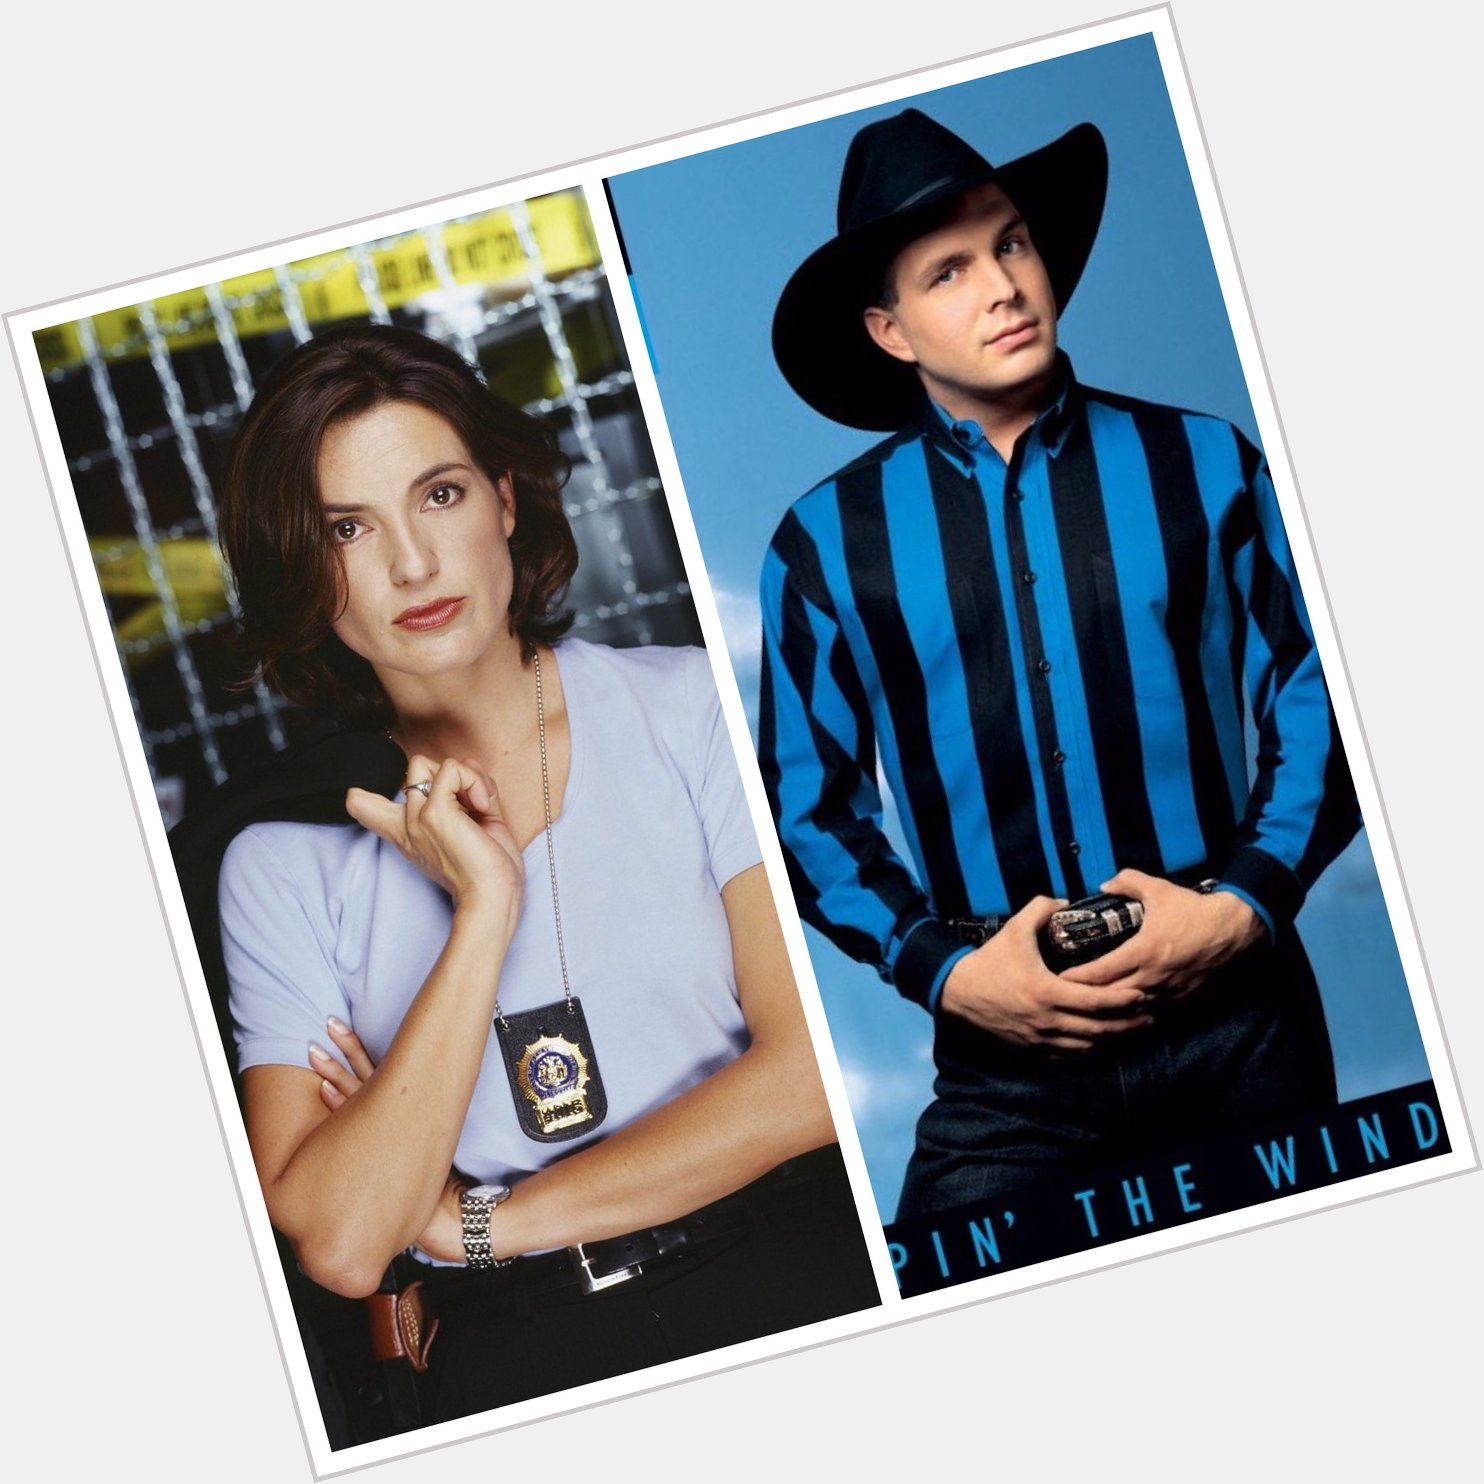 Happy birthday Olivia Benson and Garth Brooks, still waiting for your cameo on SVU kind sir. 